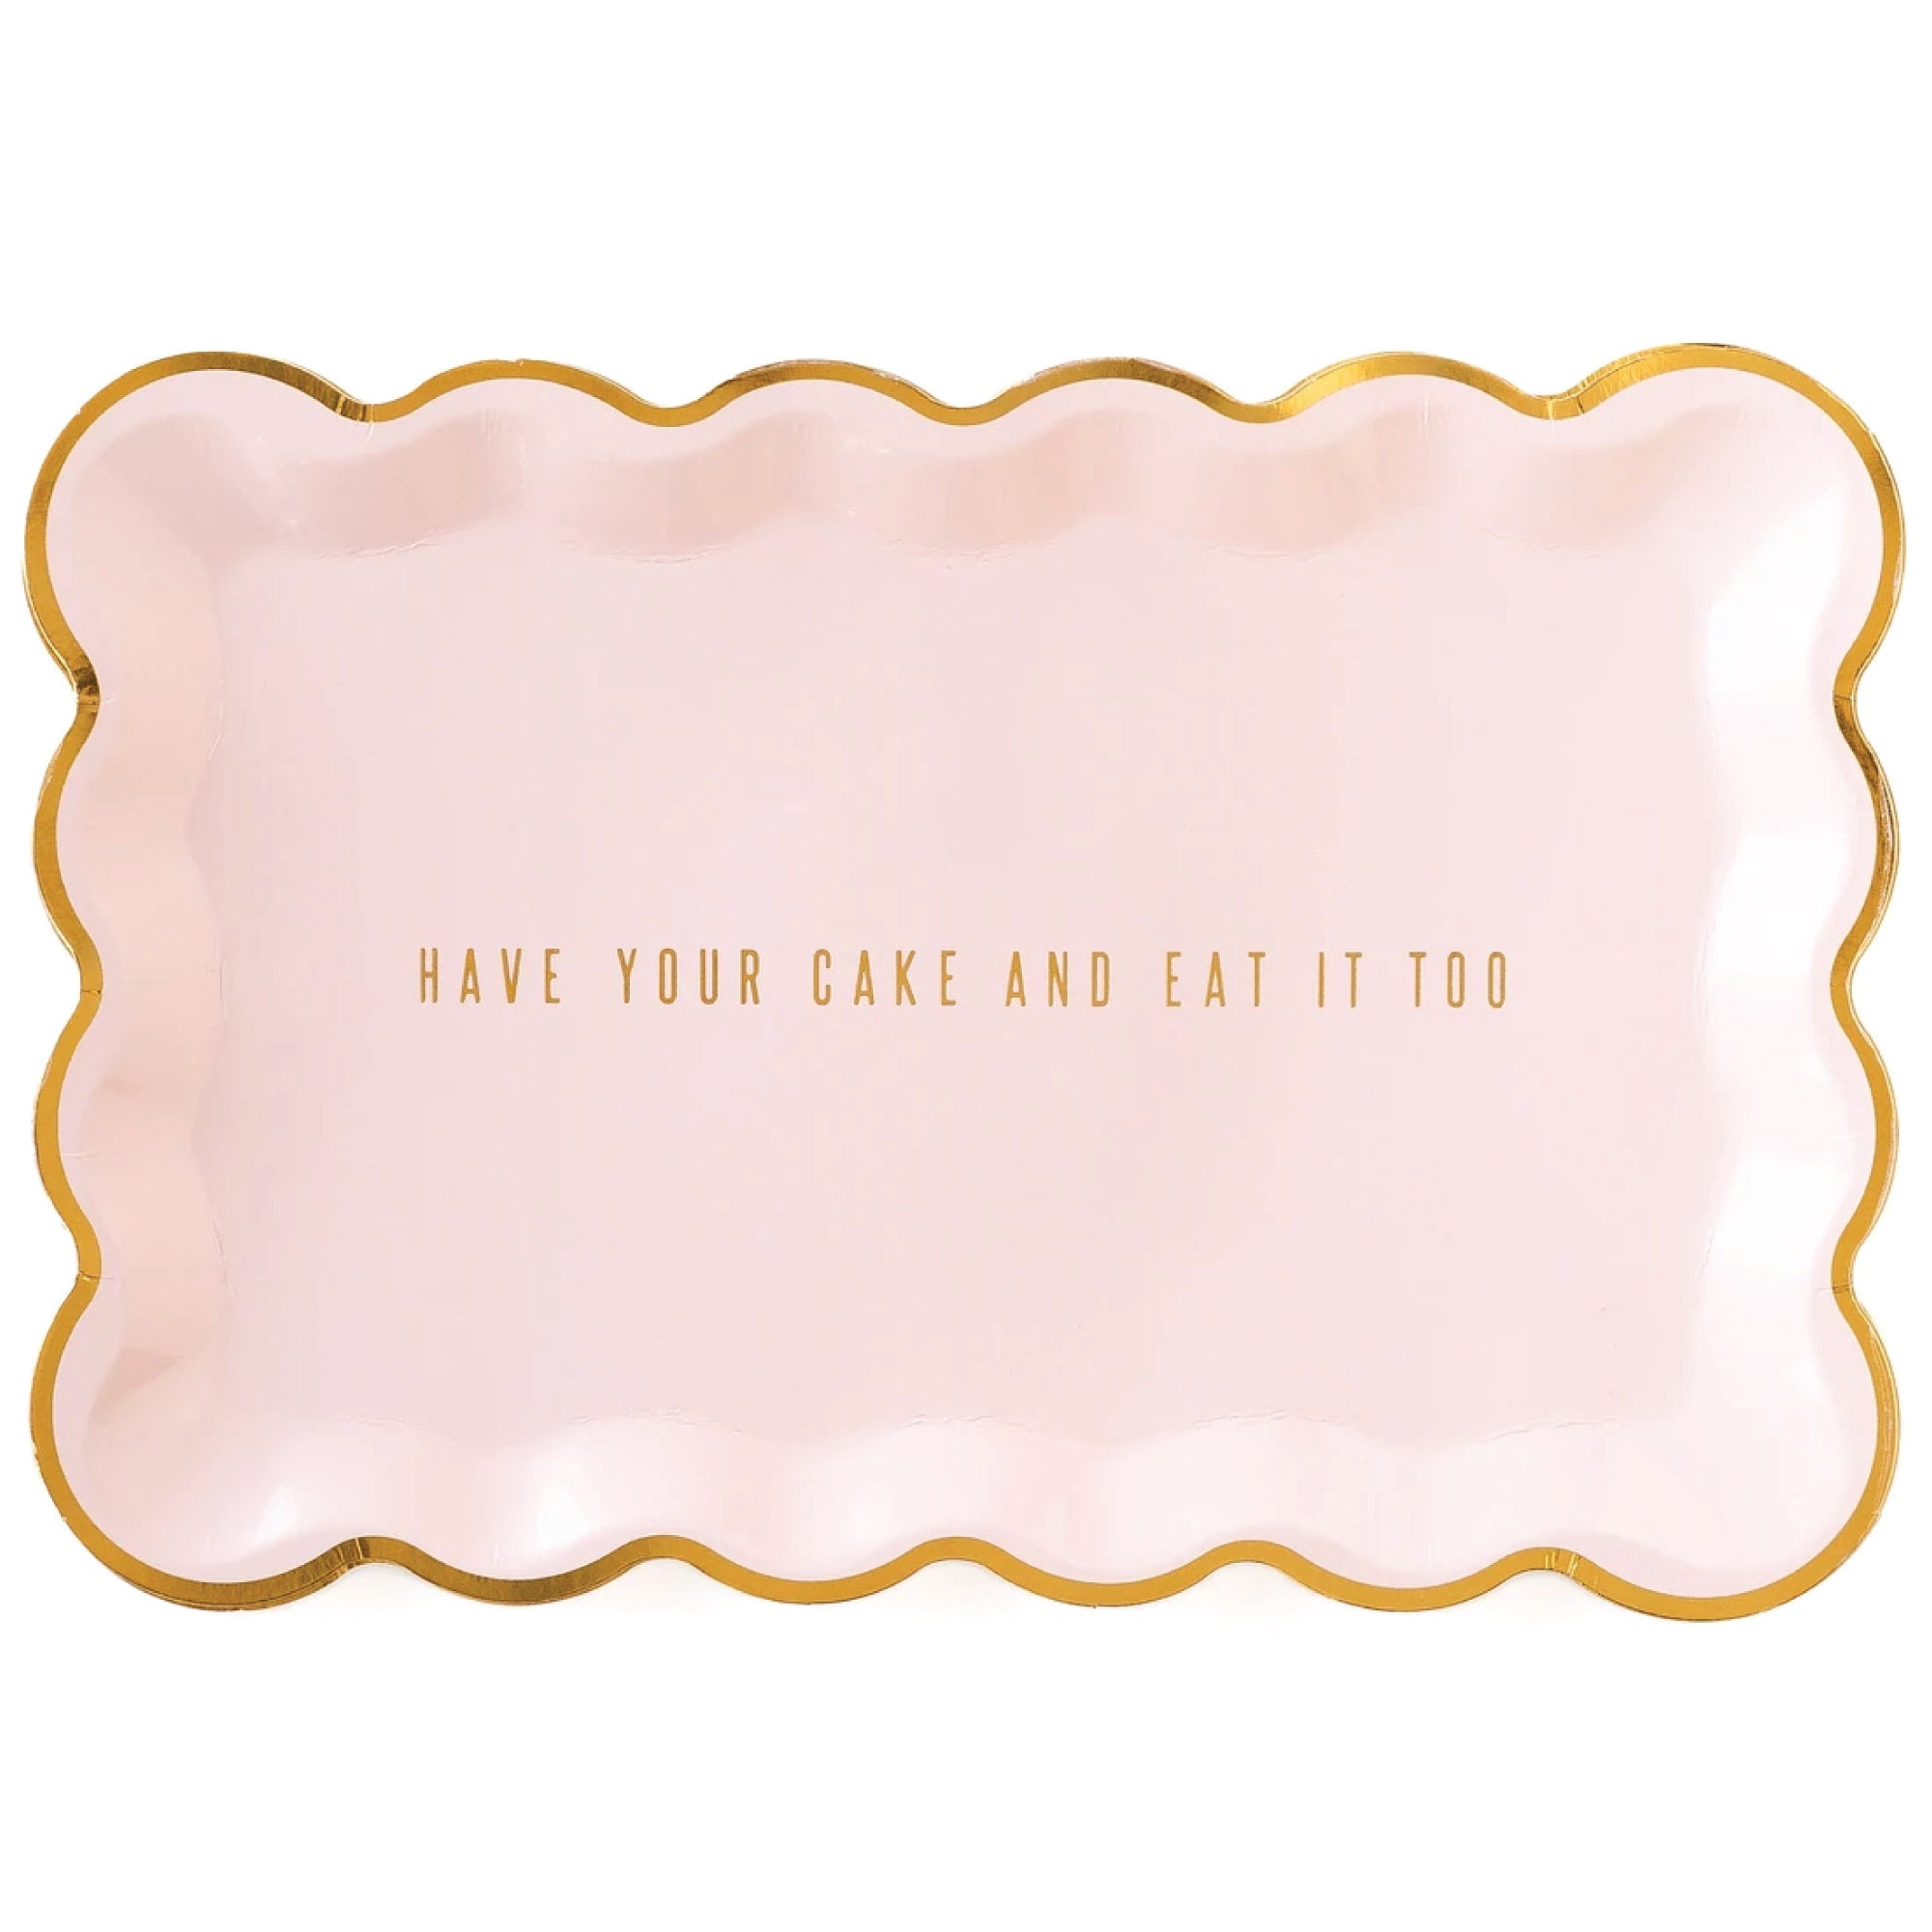 Blush Pink Rectangle Plates 8ct Girl Baby Shower Valentine Day Party Pink Bridal Shower Have Your Cake & Eat It Two Birthday Plates